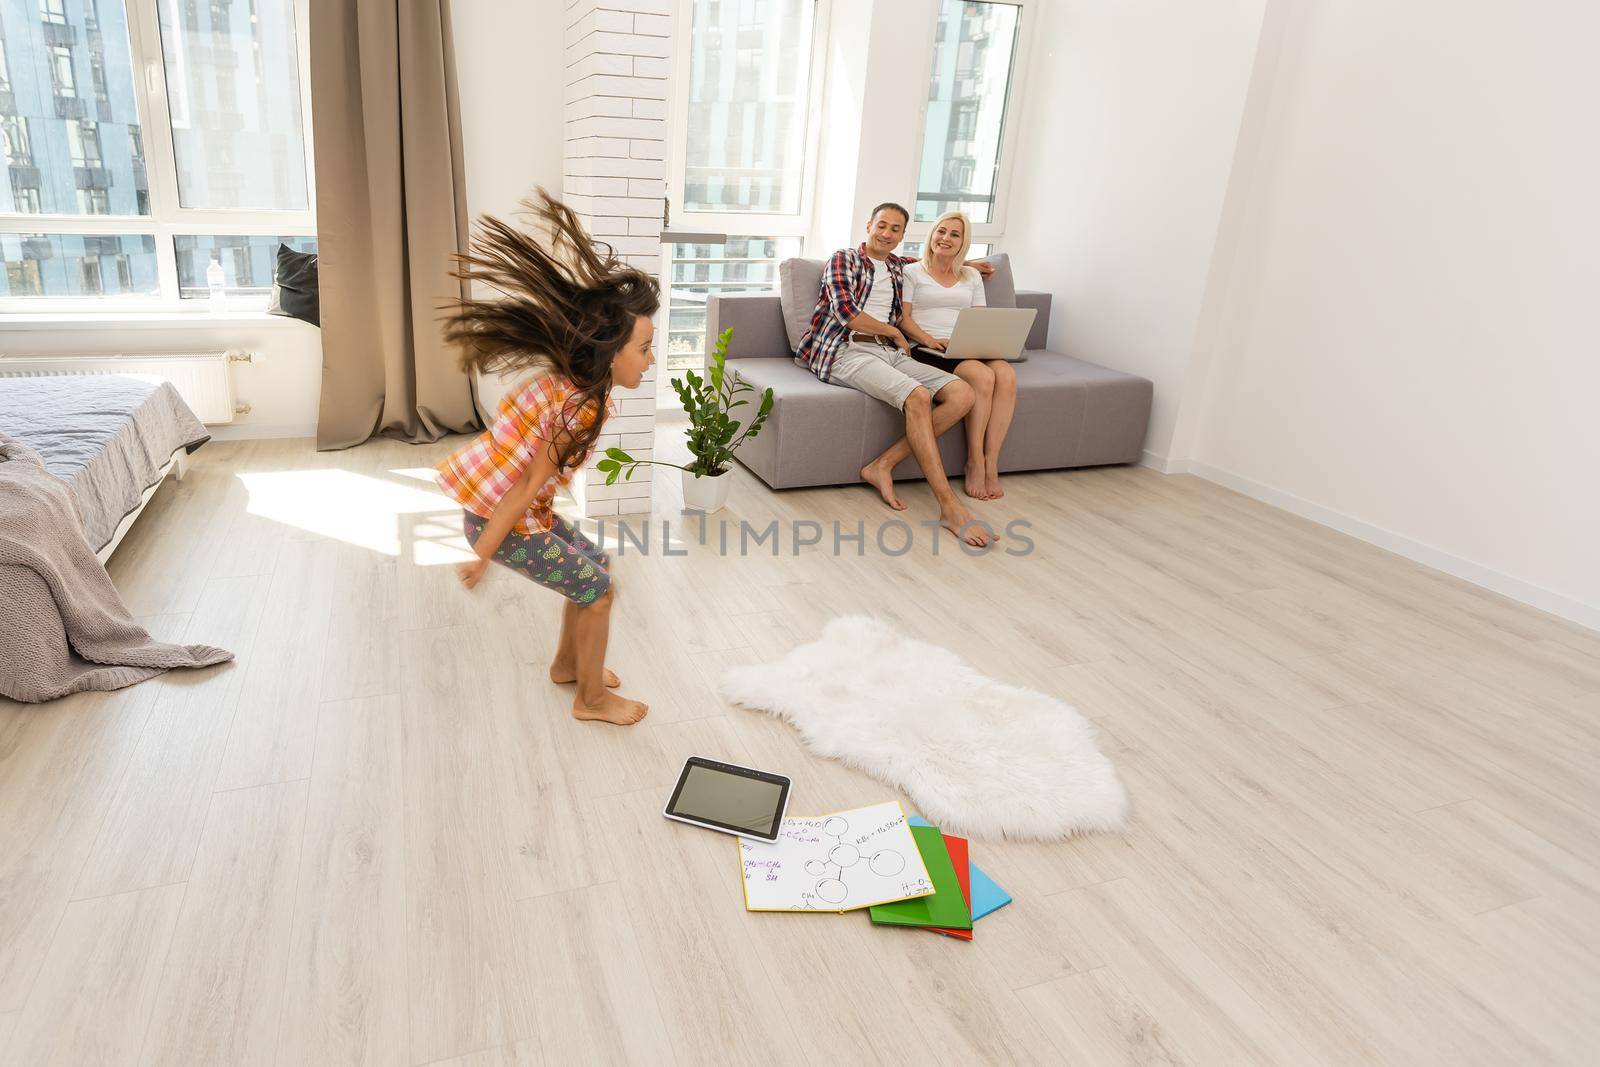 8 years old girl jumping in a child room at home, still life photo